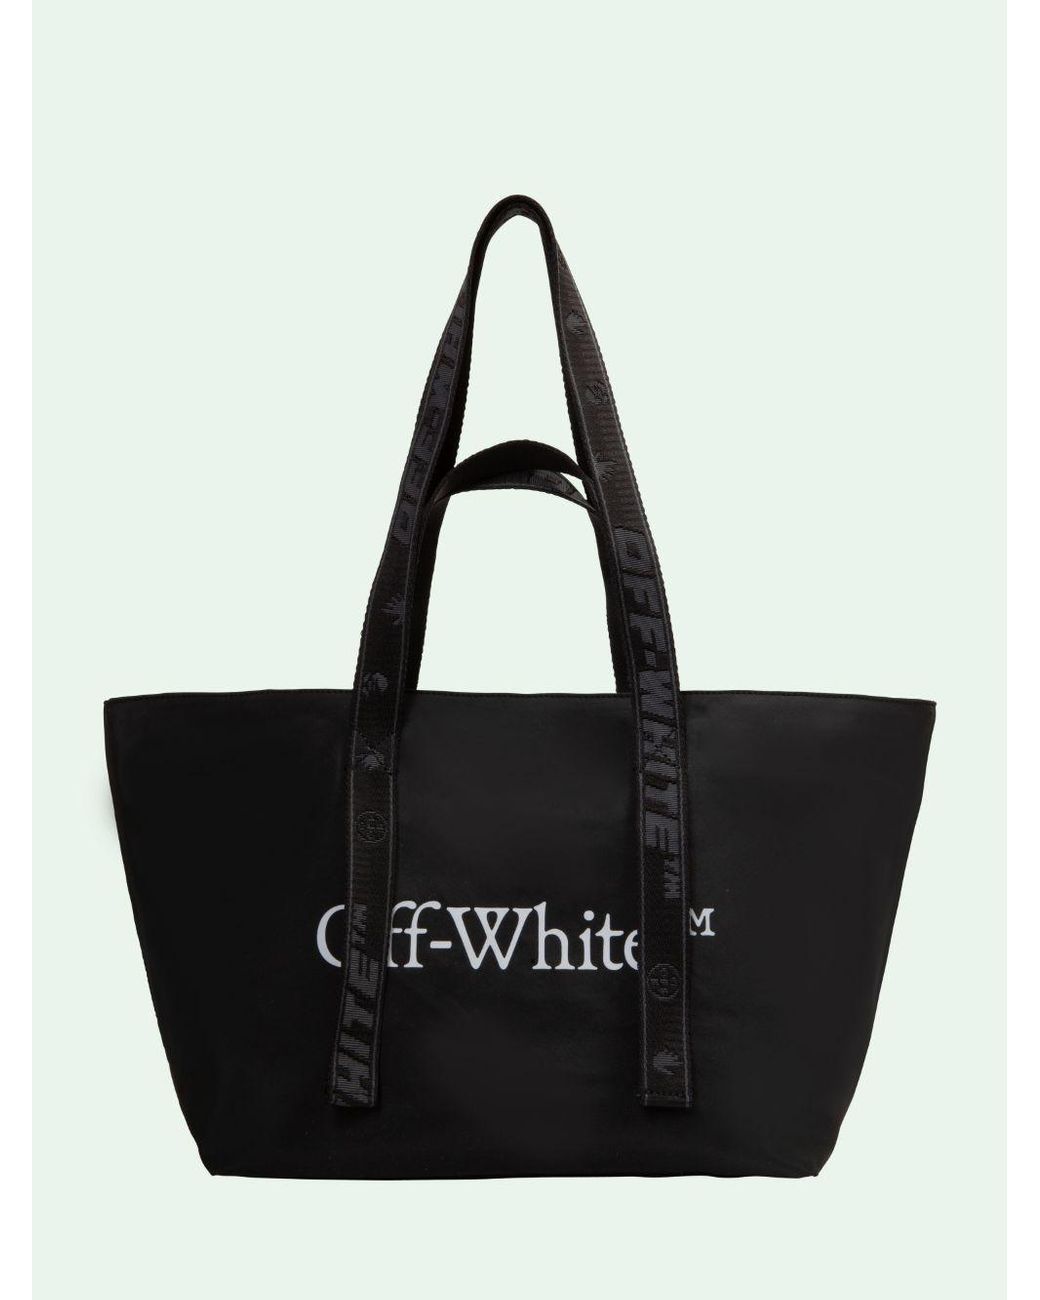 Off-White c/o Virgil Abloh Commercial Tote - Silver Totes, Handbags -  WOWVA52978